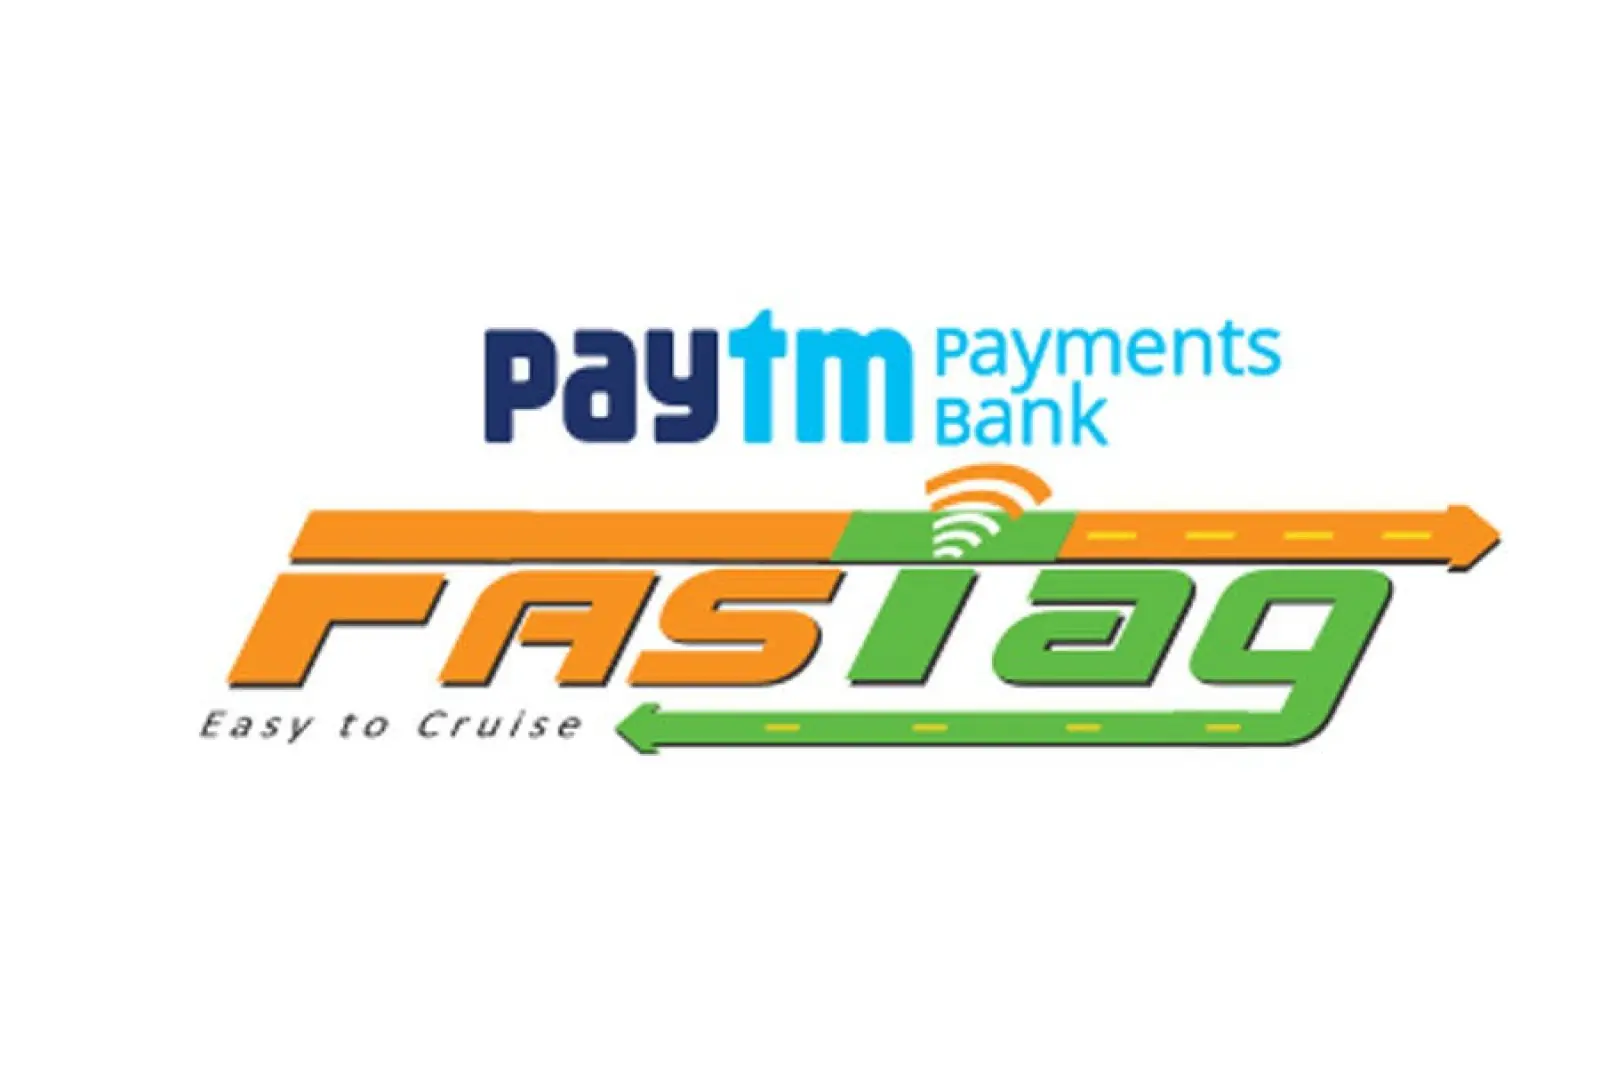 Another blow to Paytm Payments Bank! Now NHAI has imposed this restriction regarding FASTag